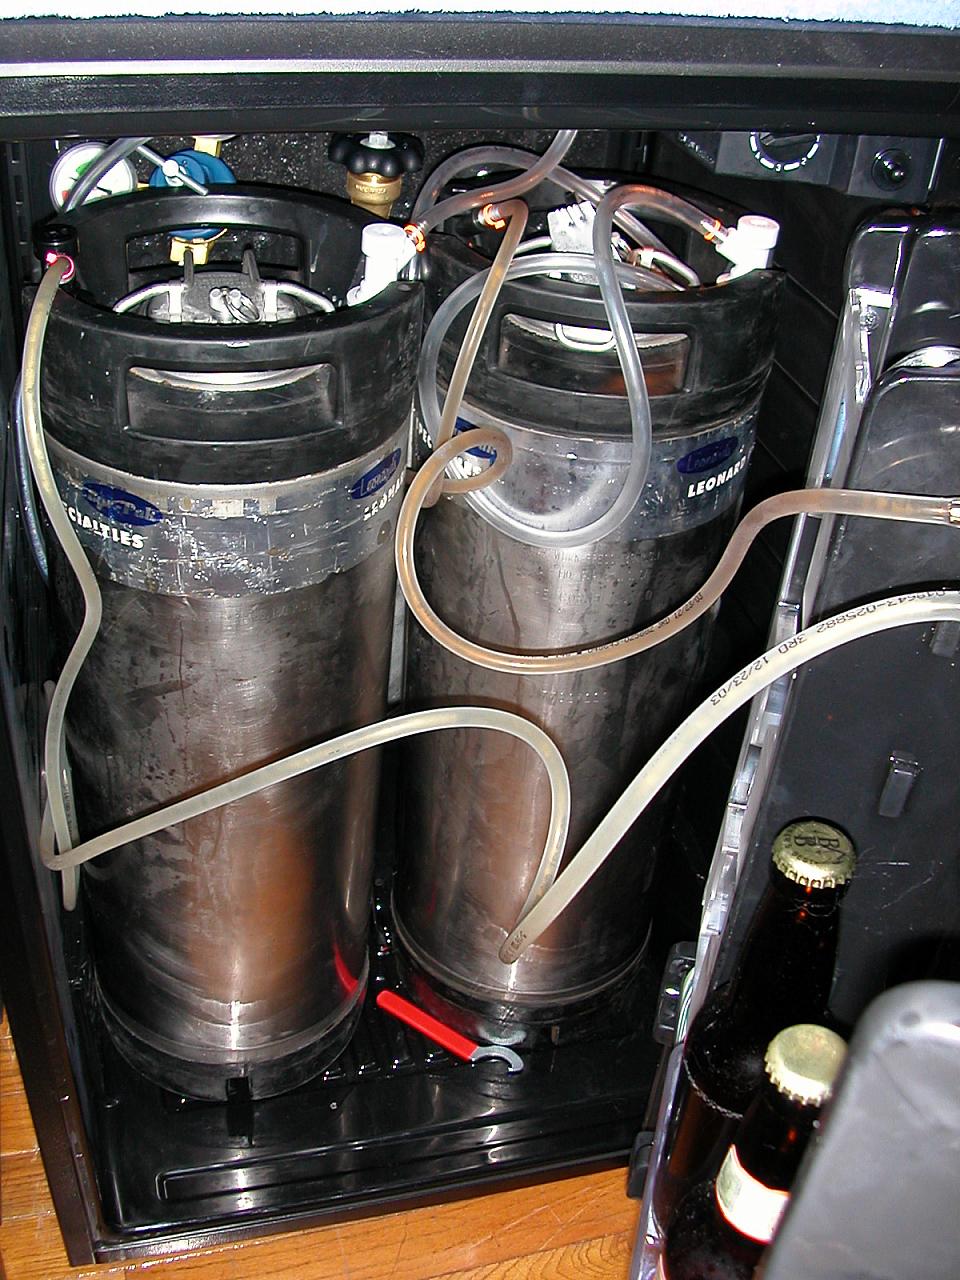 2 kegs tucked away with the faucet wrench on the floor